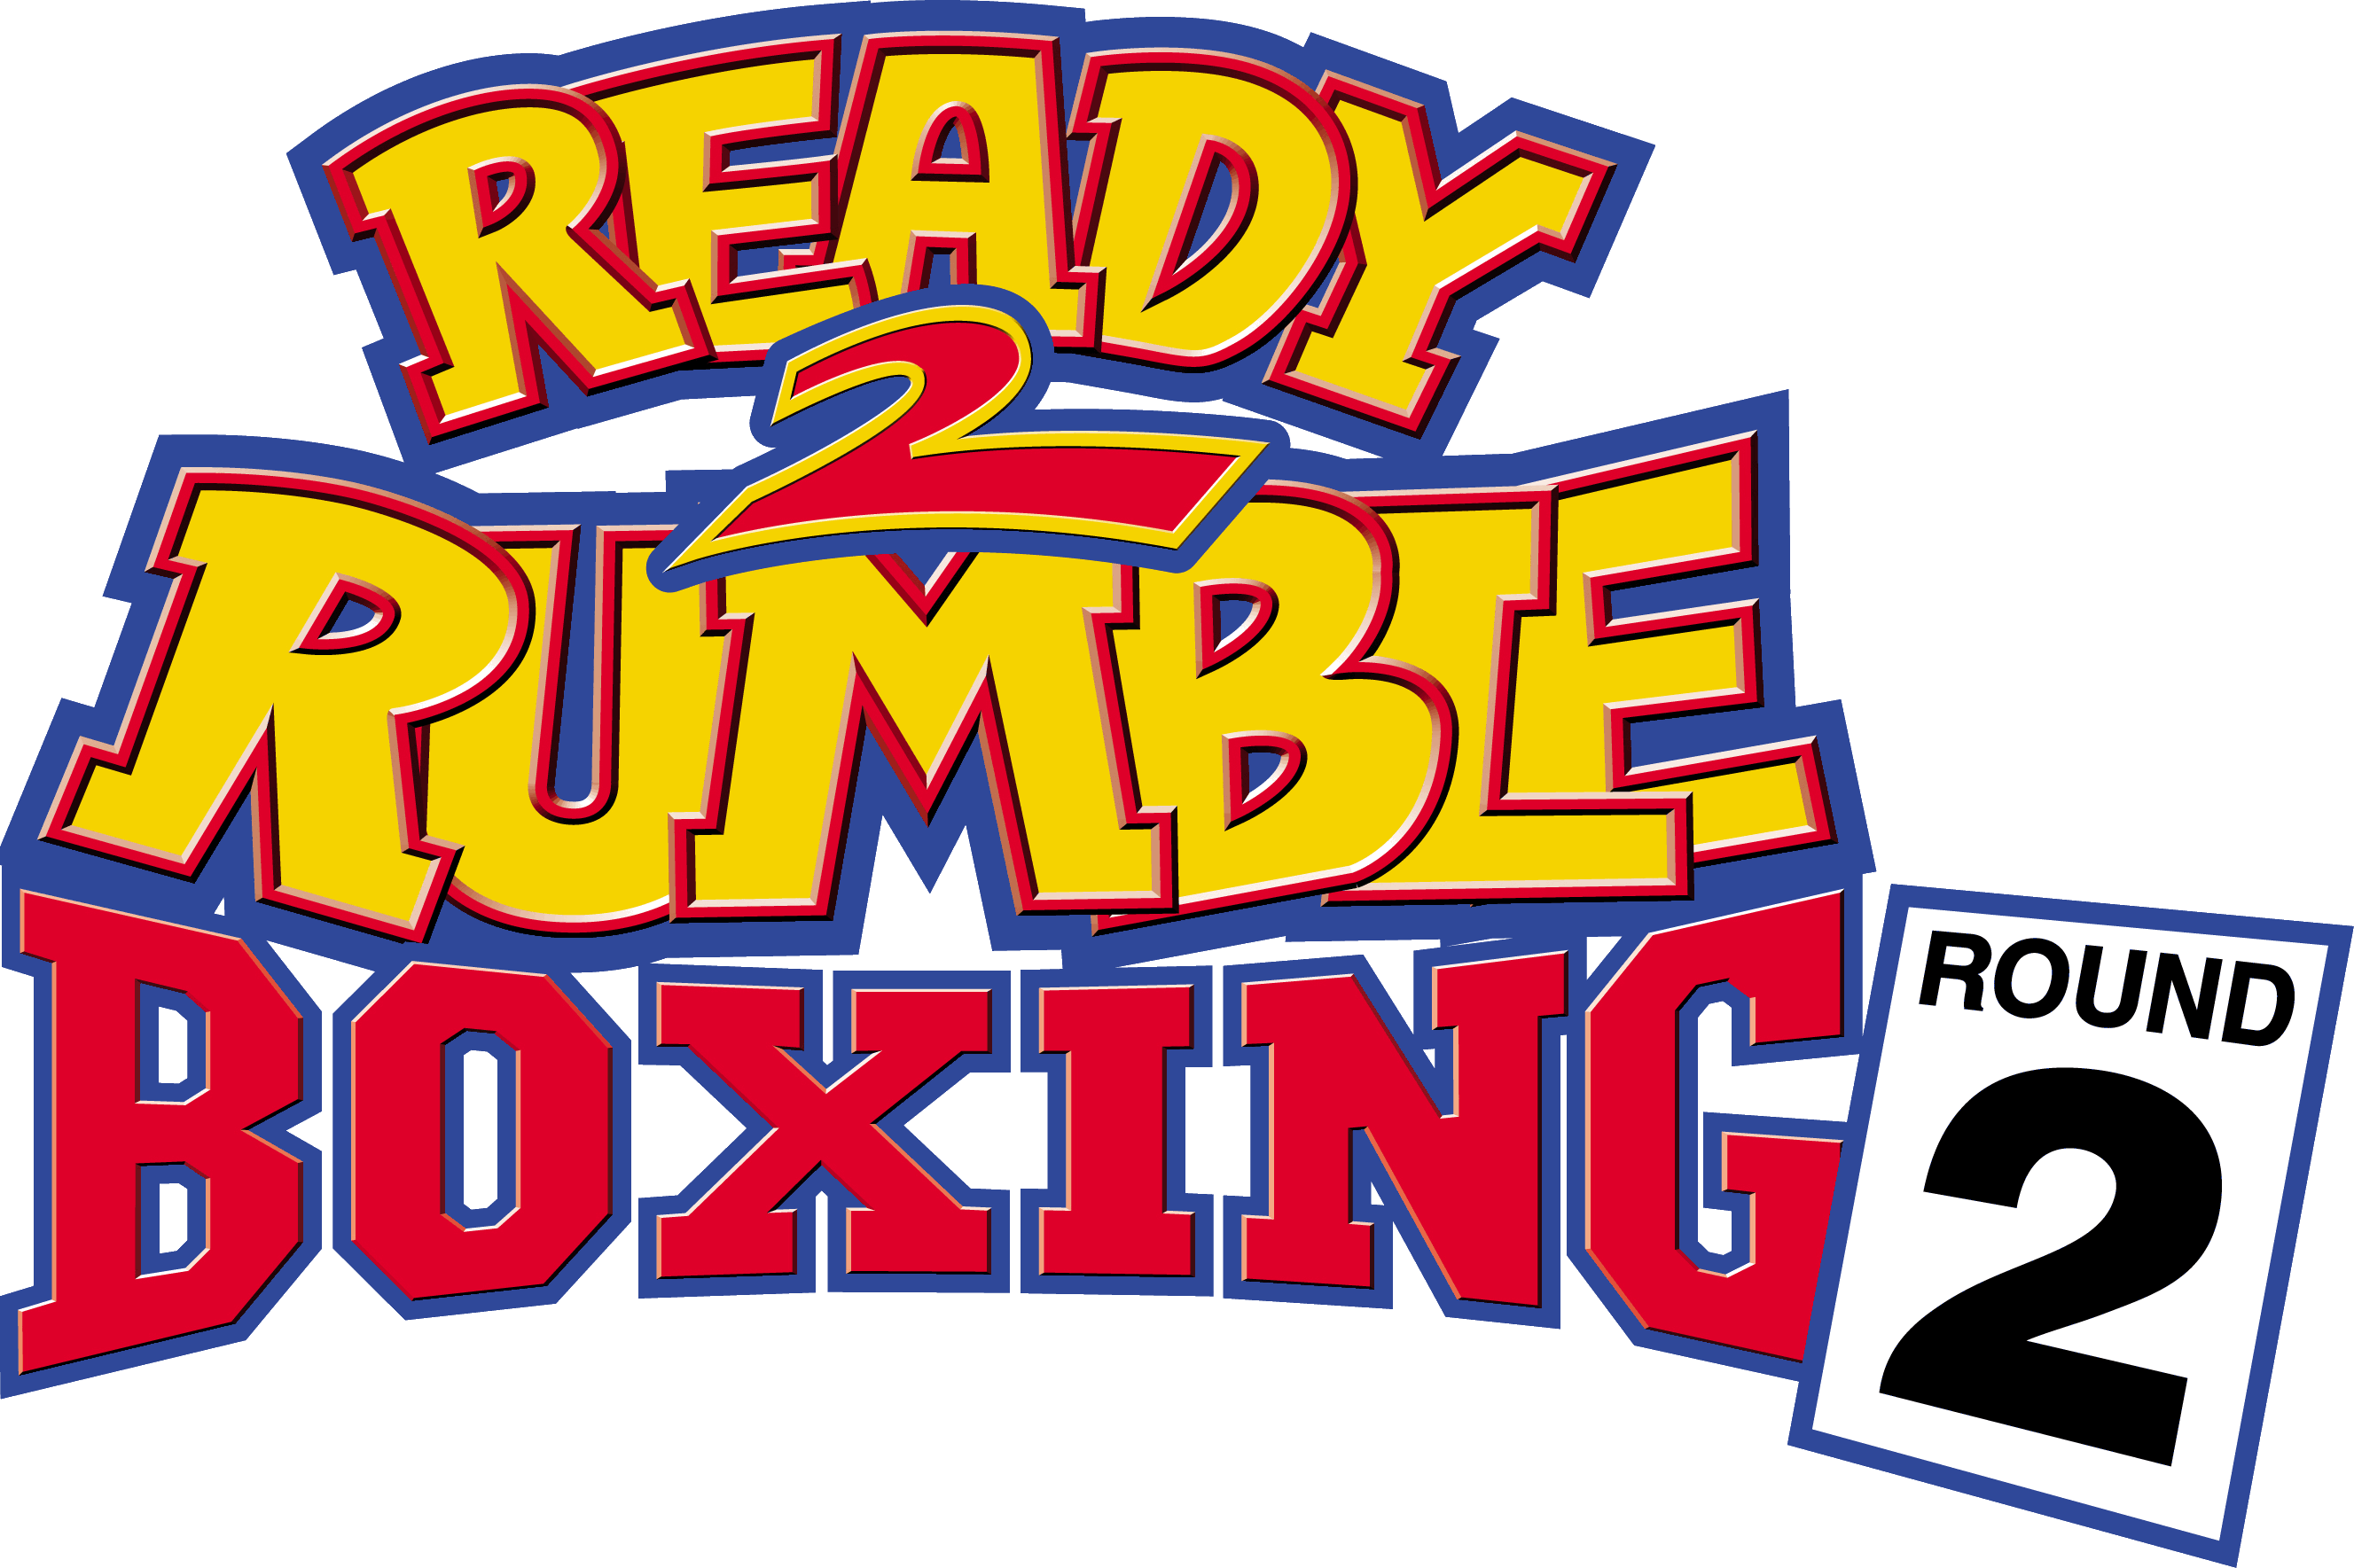 Mine 2 the ready. Ready 2 Rumble Boxing: Round 2. Ready 2 Rumble Boxing: Round 2 ps2. Ready 2 Rumble Boxing ps1. Ready 2 Rumble Boxing Round 2 ps1 русская psxplanet.